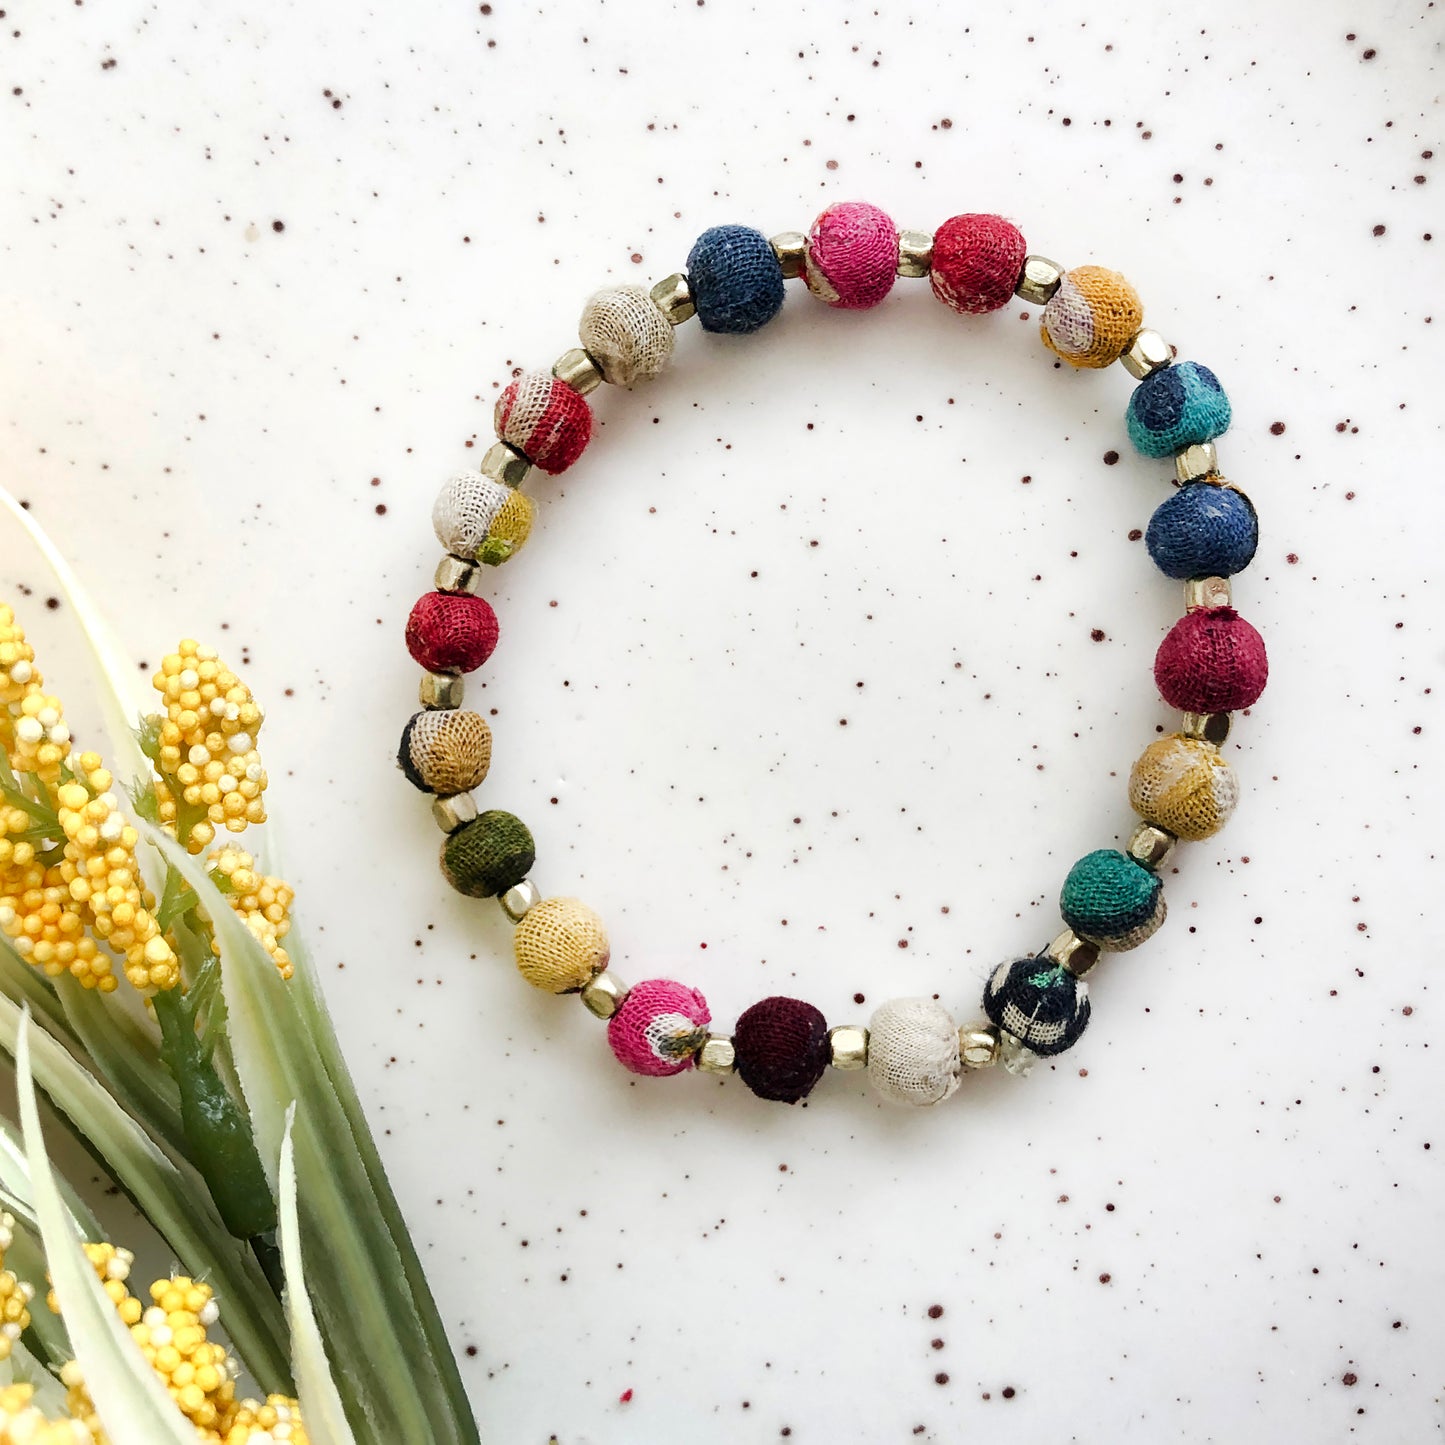 Dotted Kantha BraceletA bracelet made from small colorful textile-wrapped beads is shown next to yellow flowers.